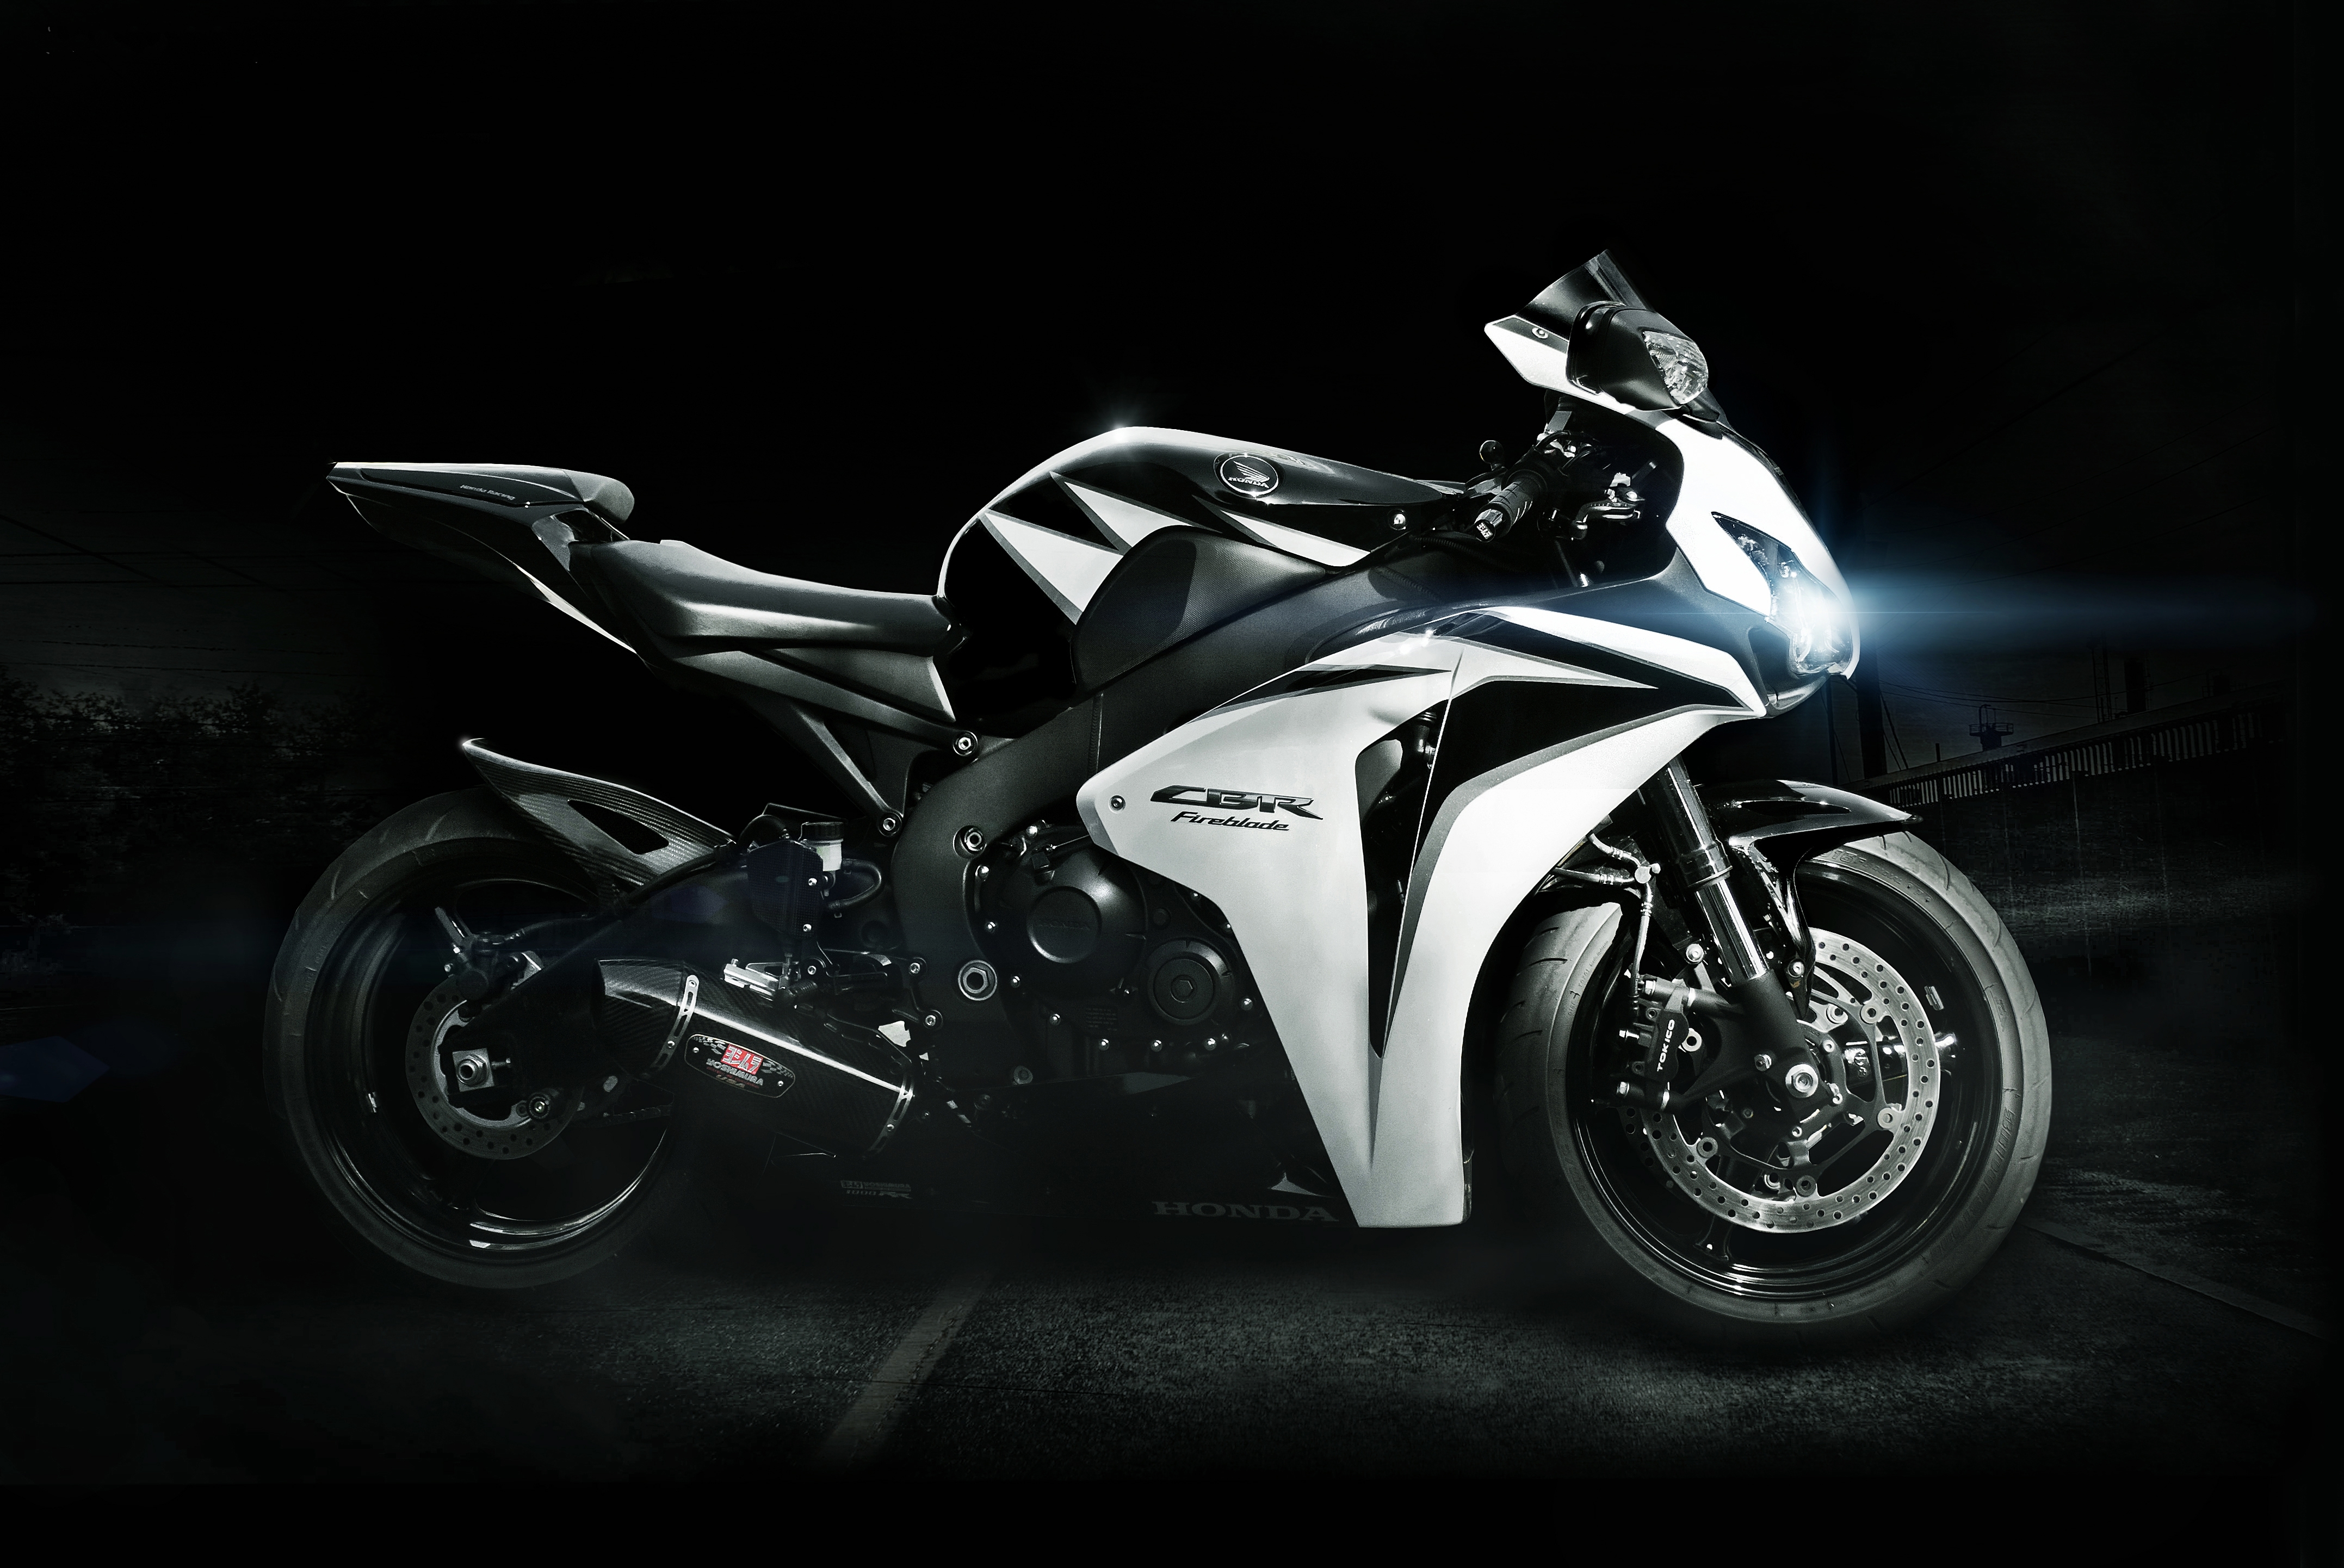 A black and white motorcycle from Honda